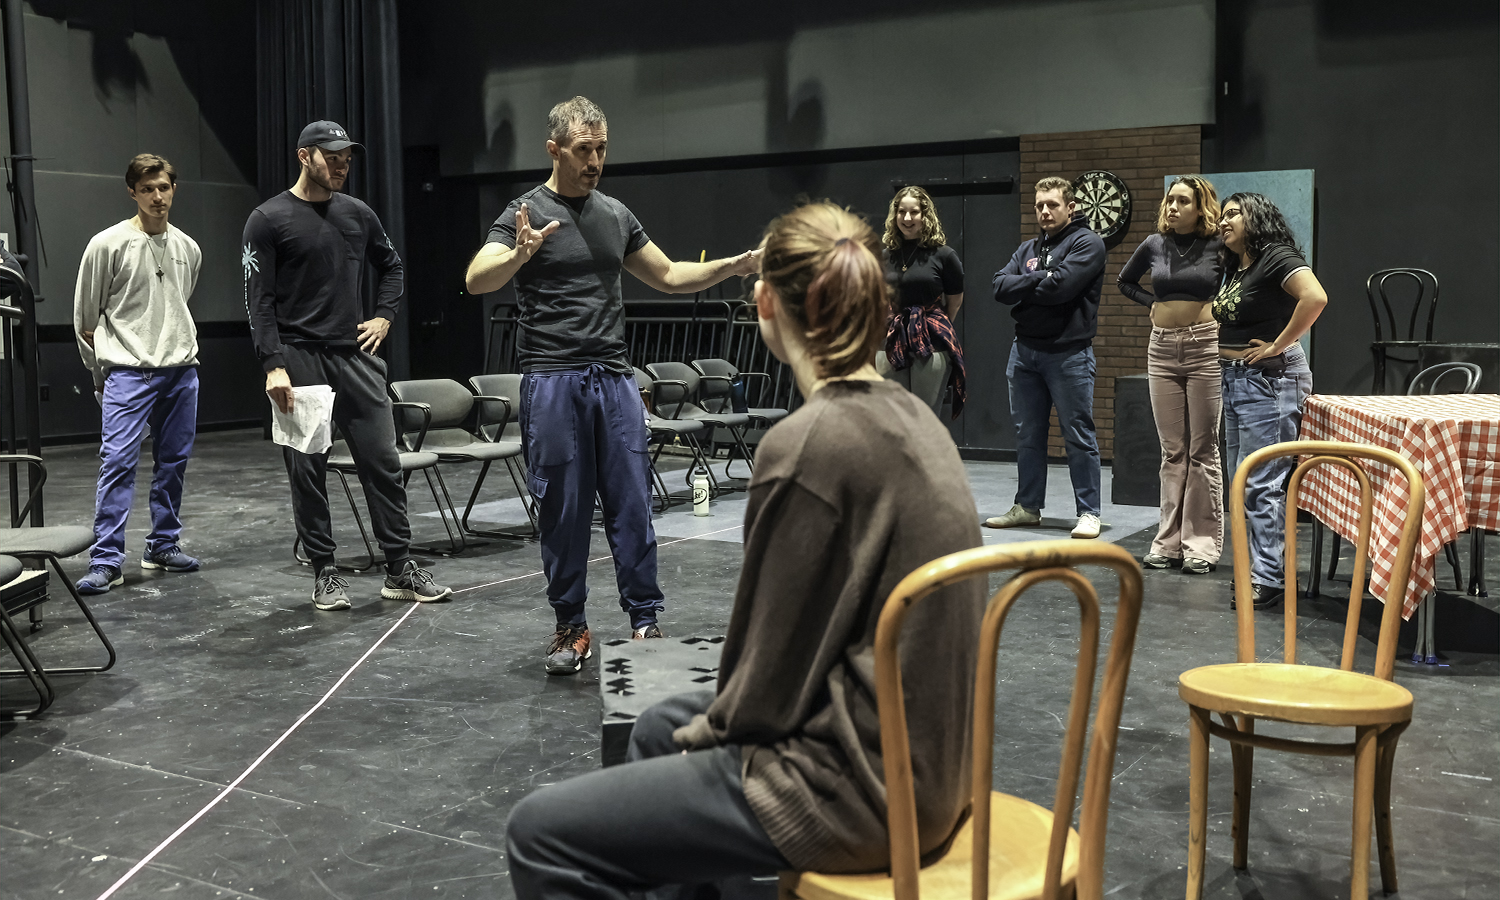 Associate Professor of Theatre Chris Hatch leads students during rehearsal for “Much Ado About Nothing” in the McDonald Theatre.